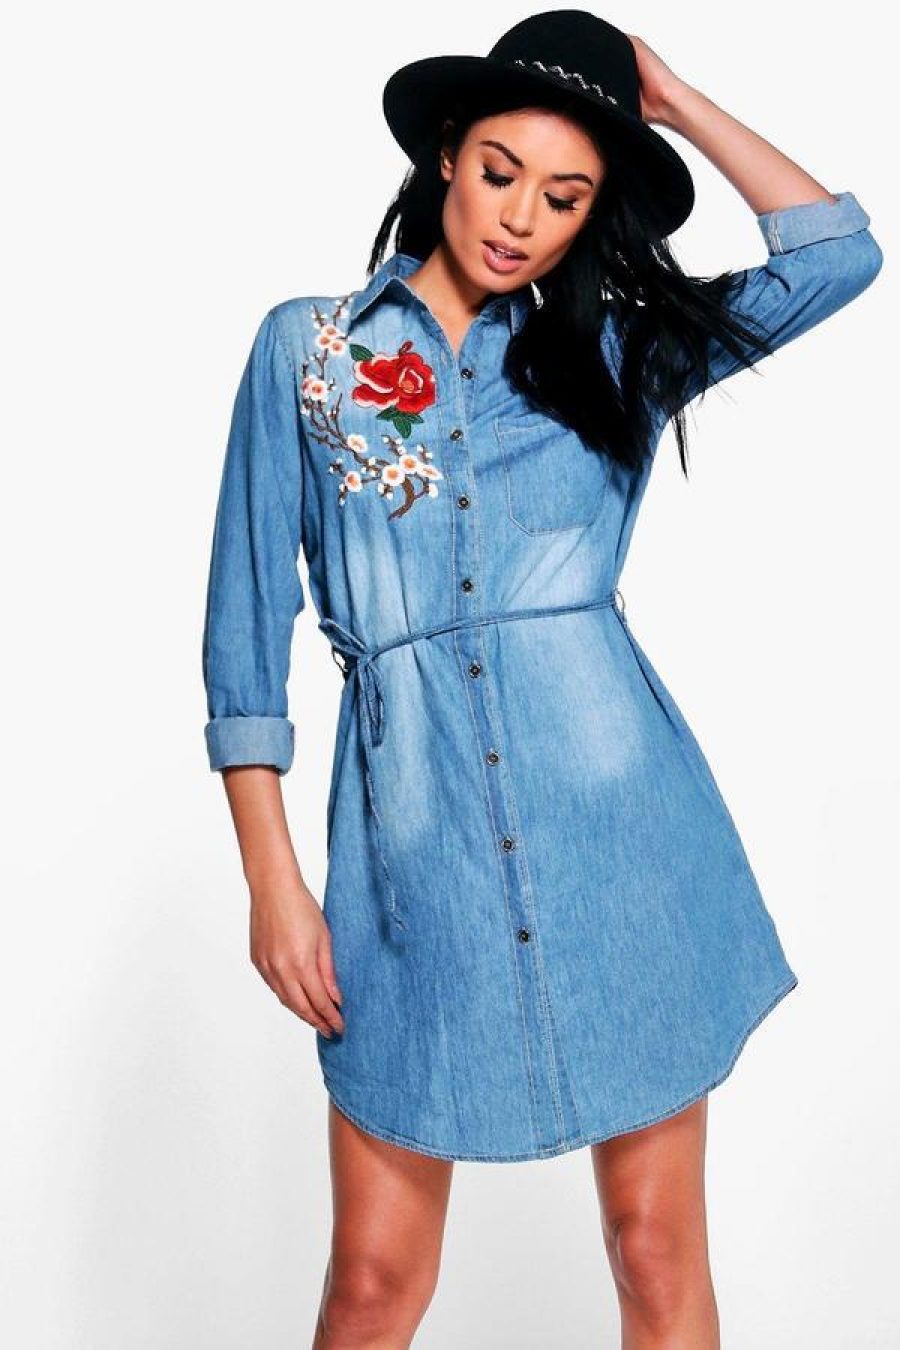 See Need Want Trend Alert Embroidered Denim B0Ohoo